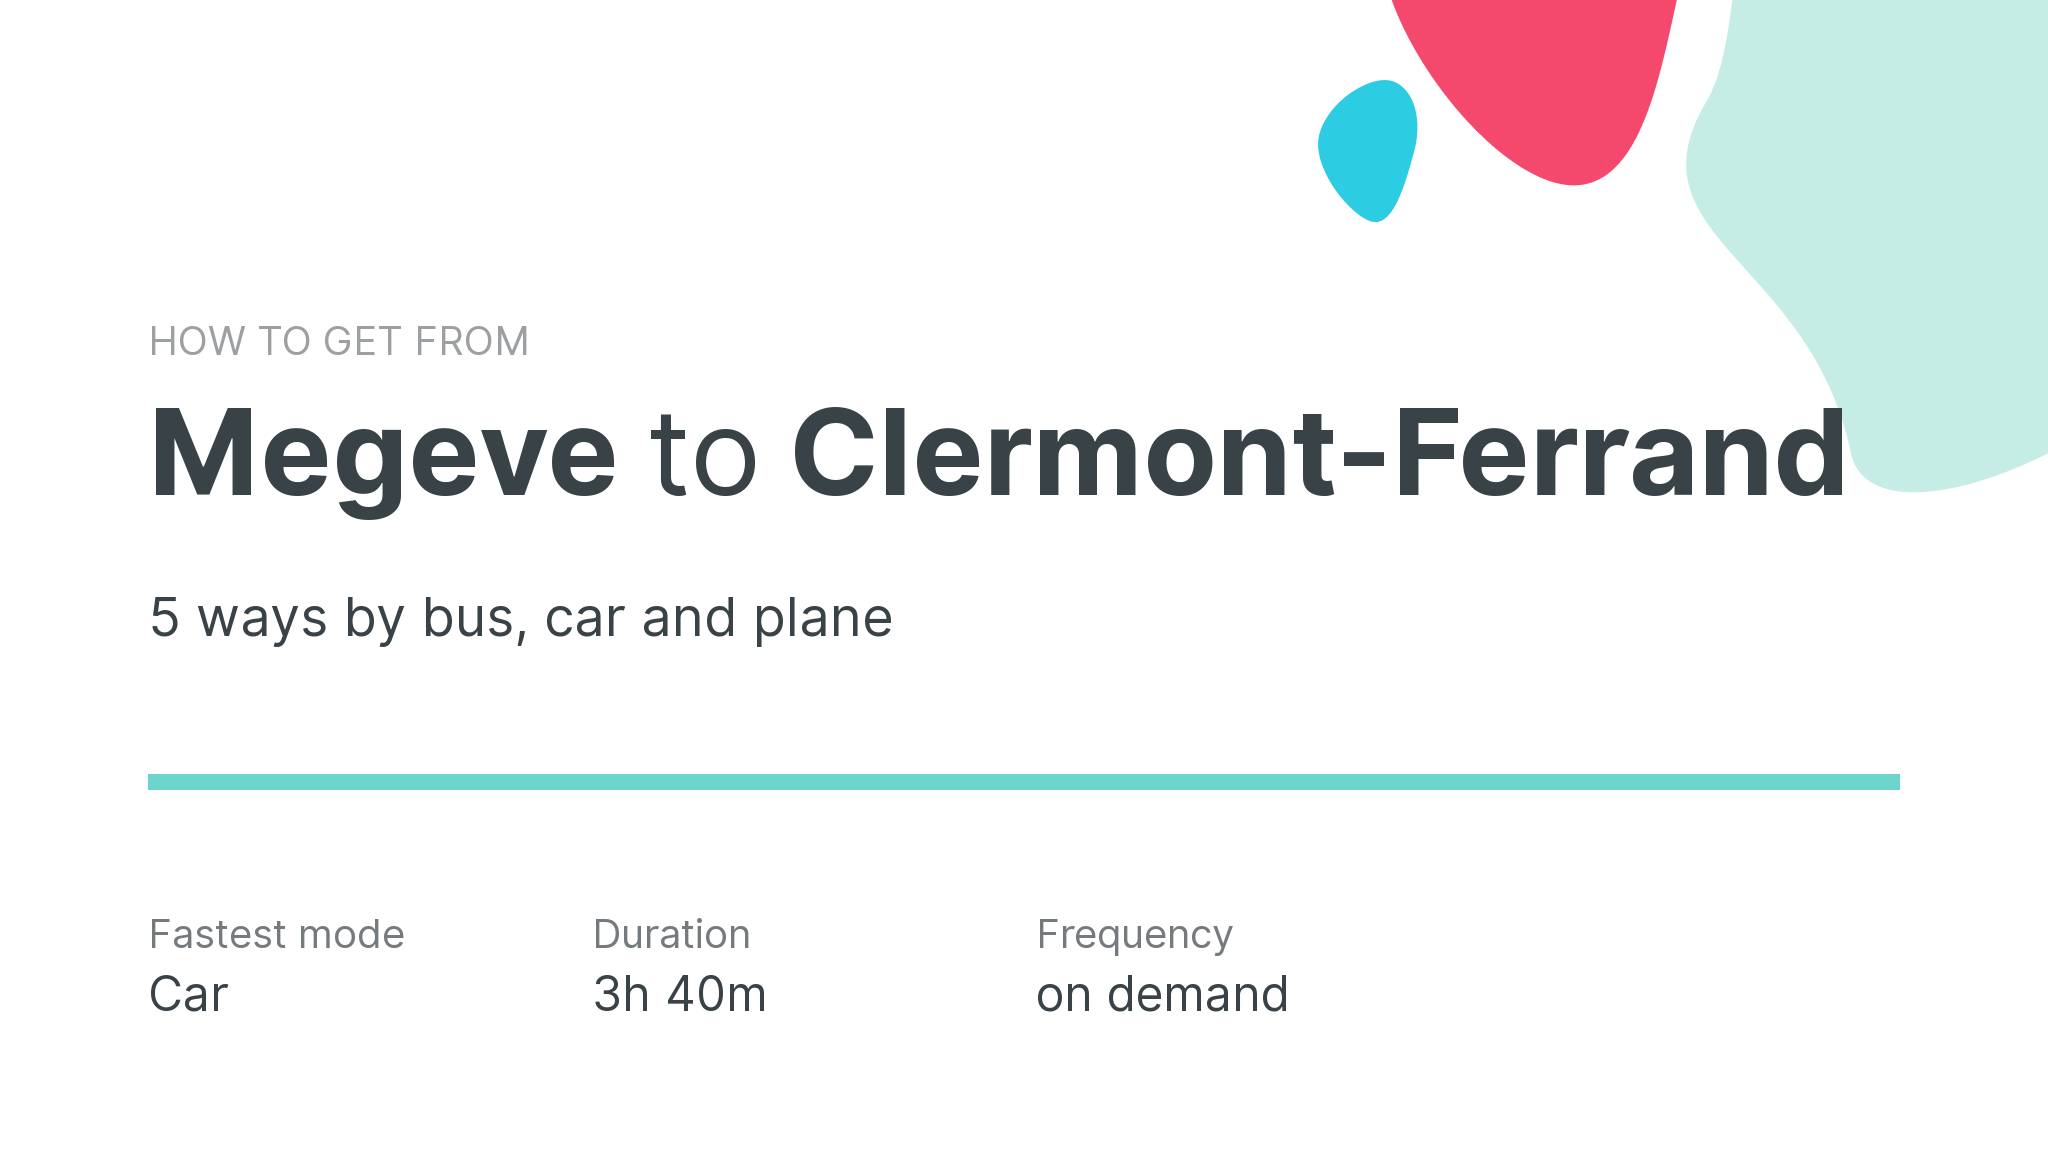 How do I get from Megeve to Clermont-Ferrand